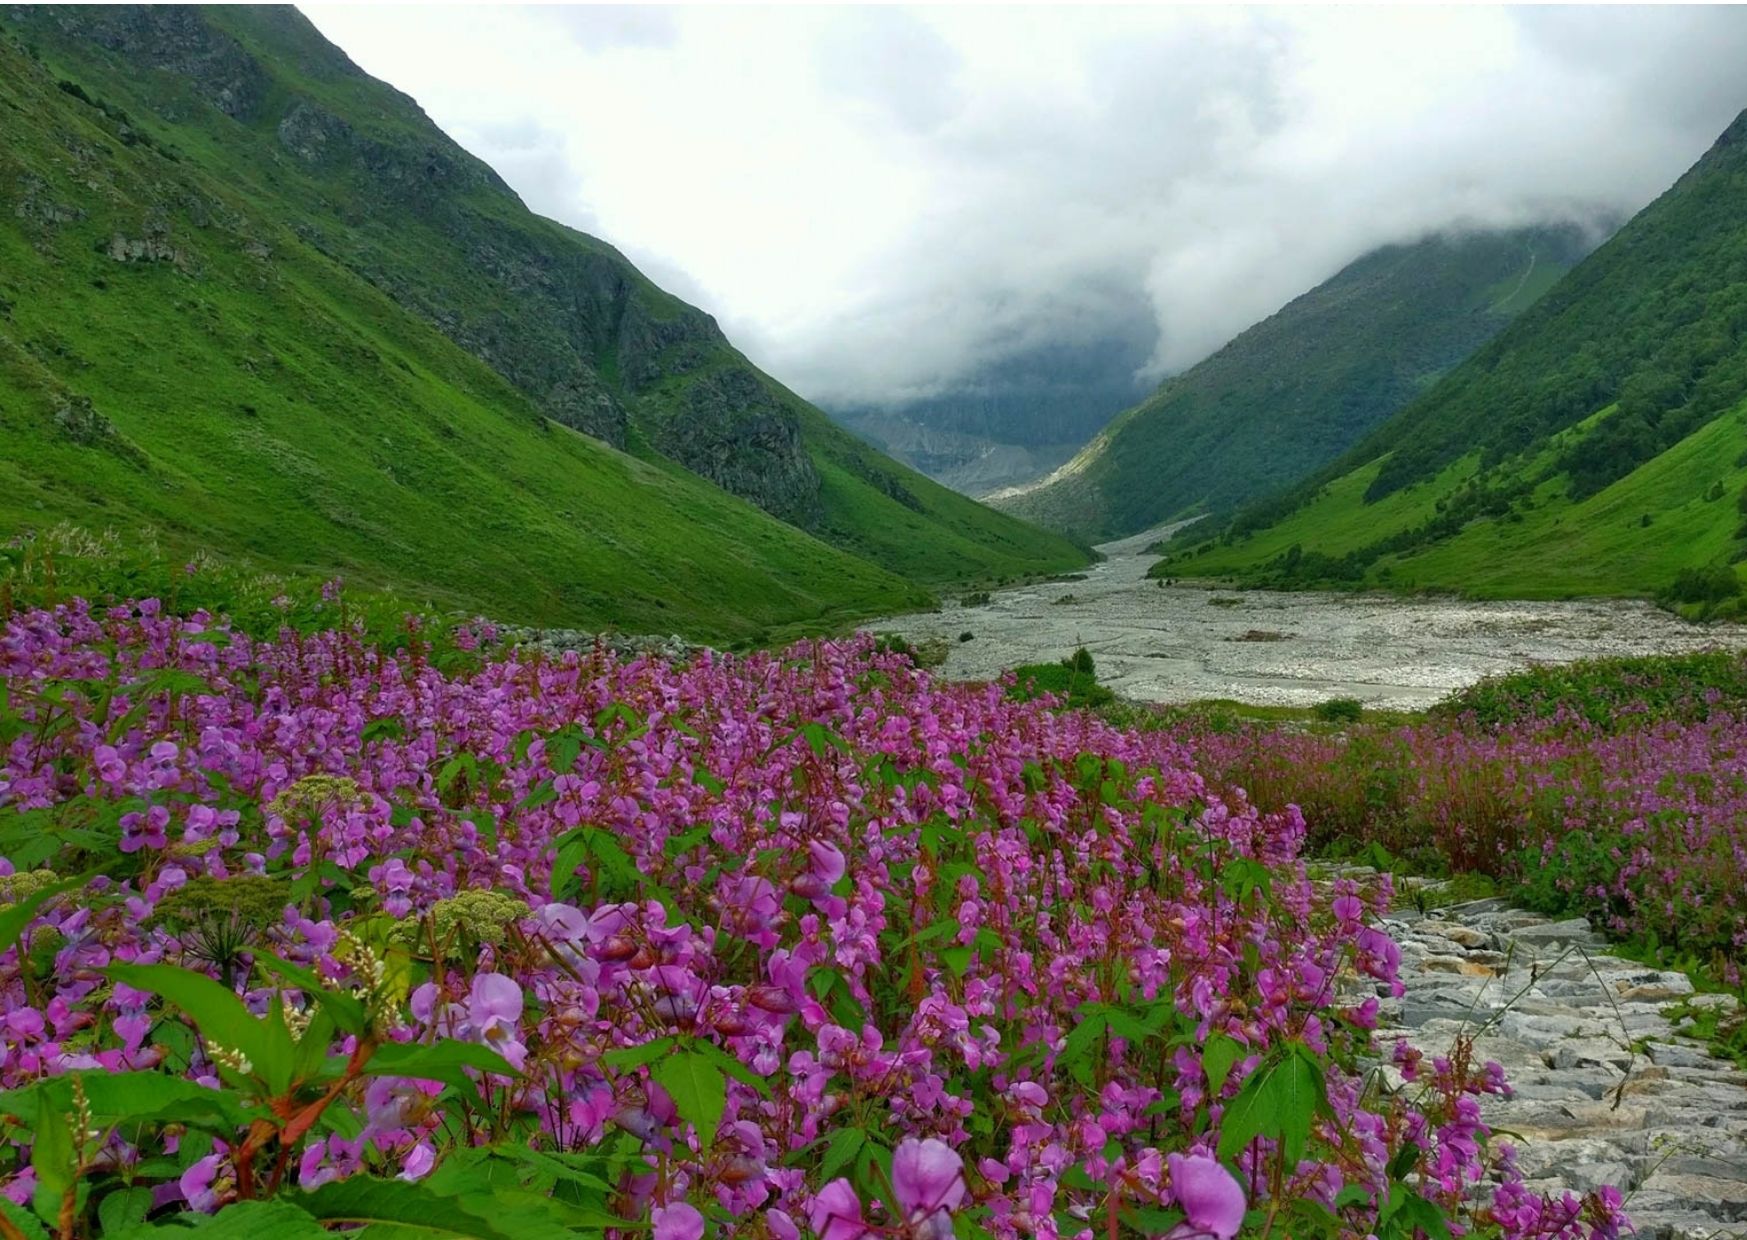 Uttarakhand's Valley of Flowers opens for tourists - Travel Trade Journal